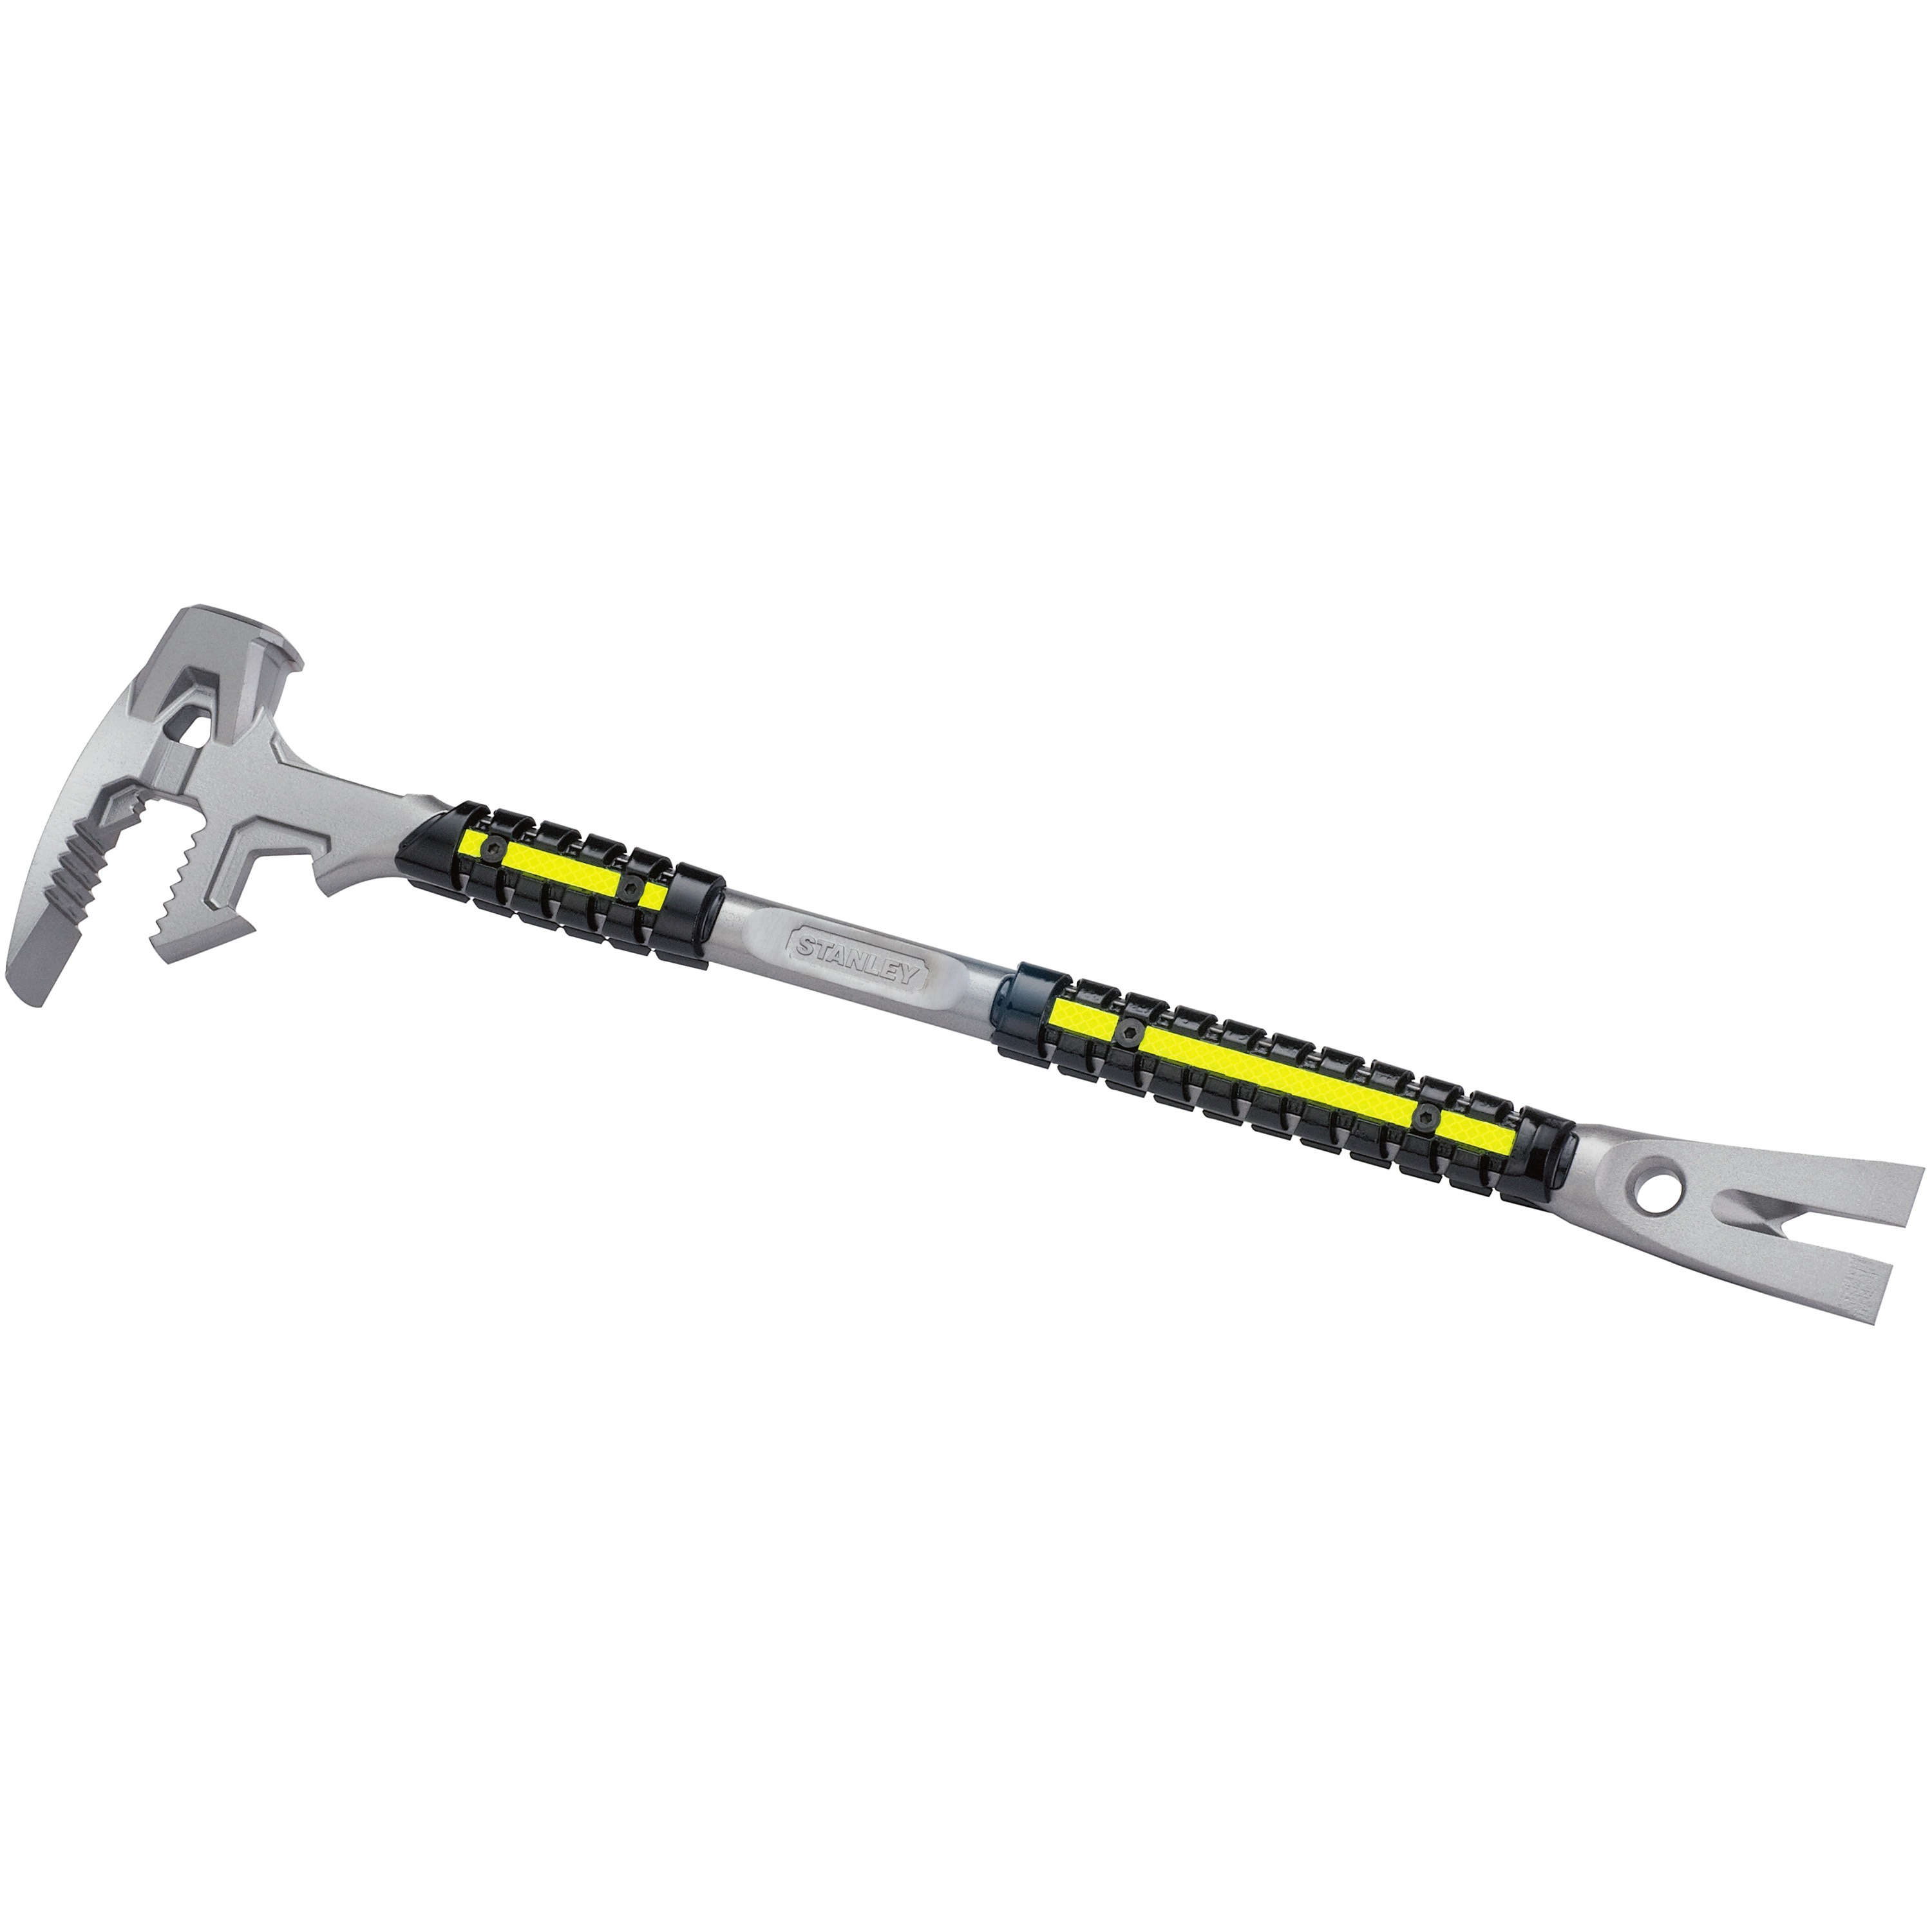 Stanley Tools - 30 in Fubar Forcible Entry Tool - 55-122